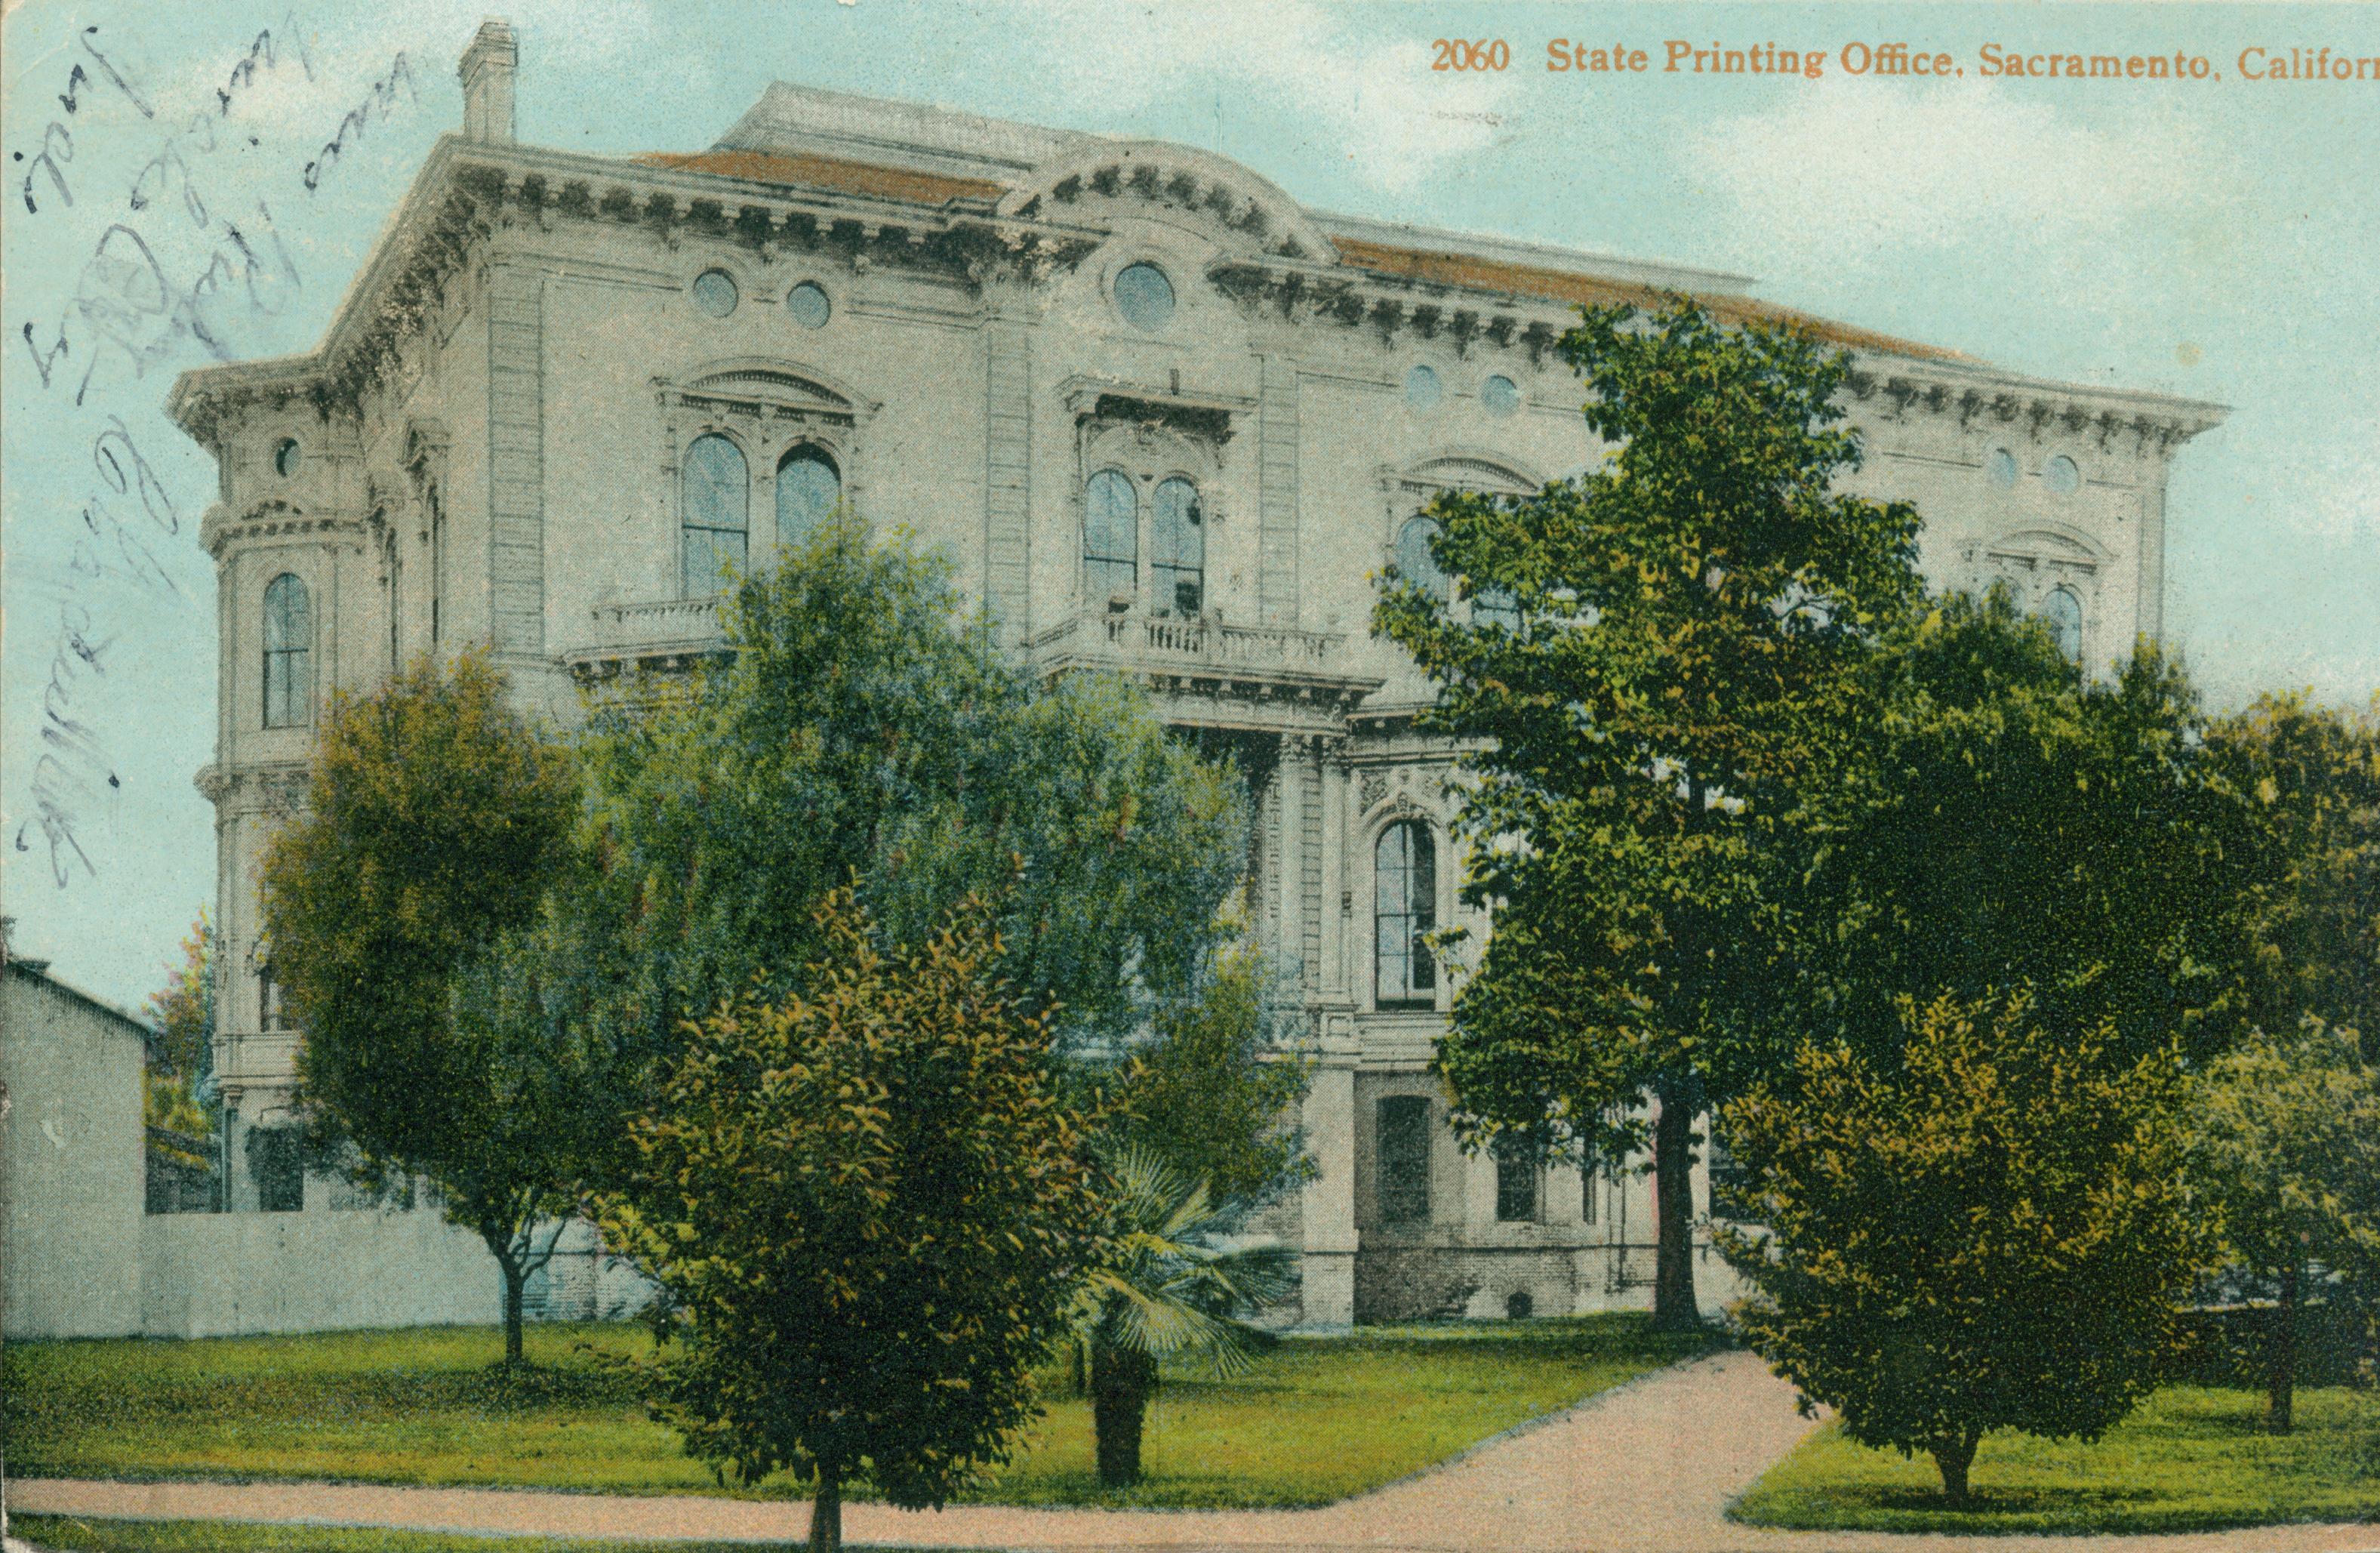 This postcard shows the front façade of the McClatchy building.